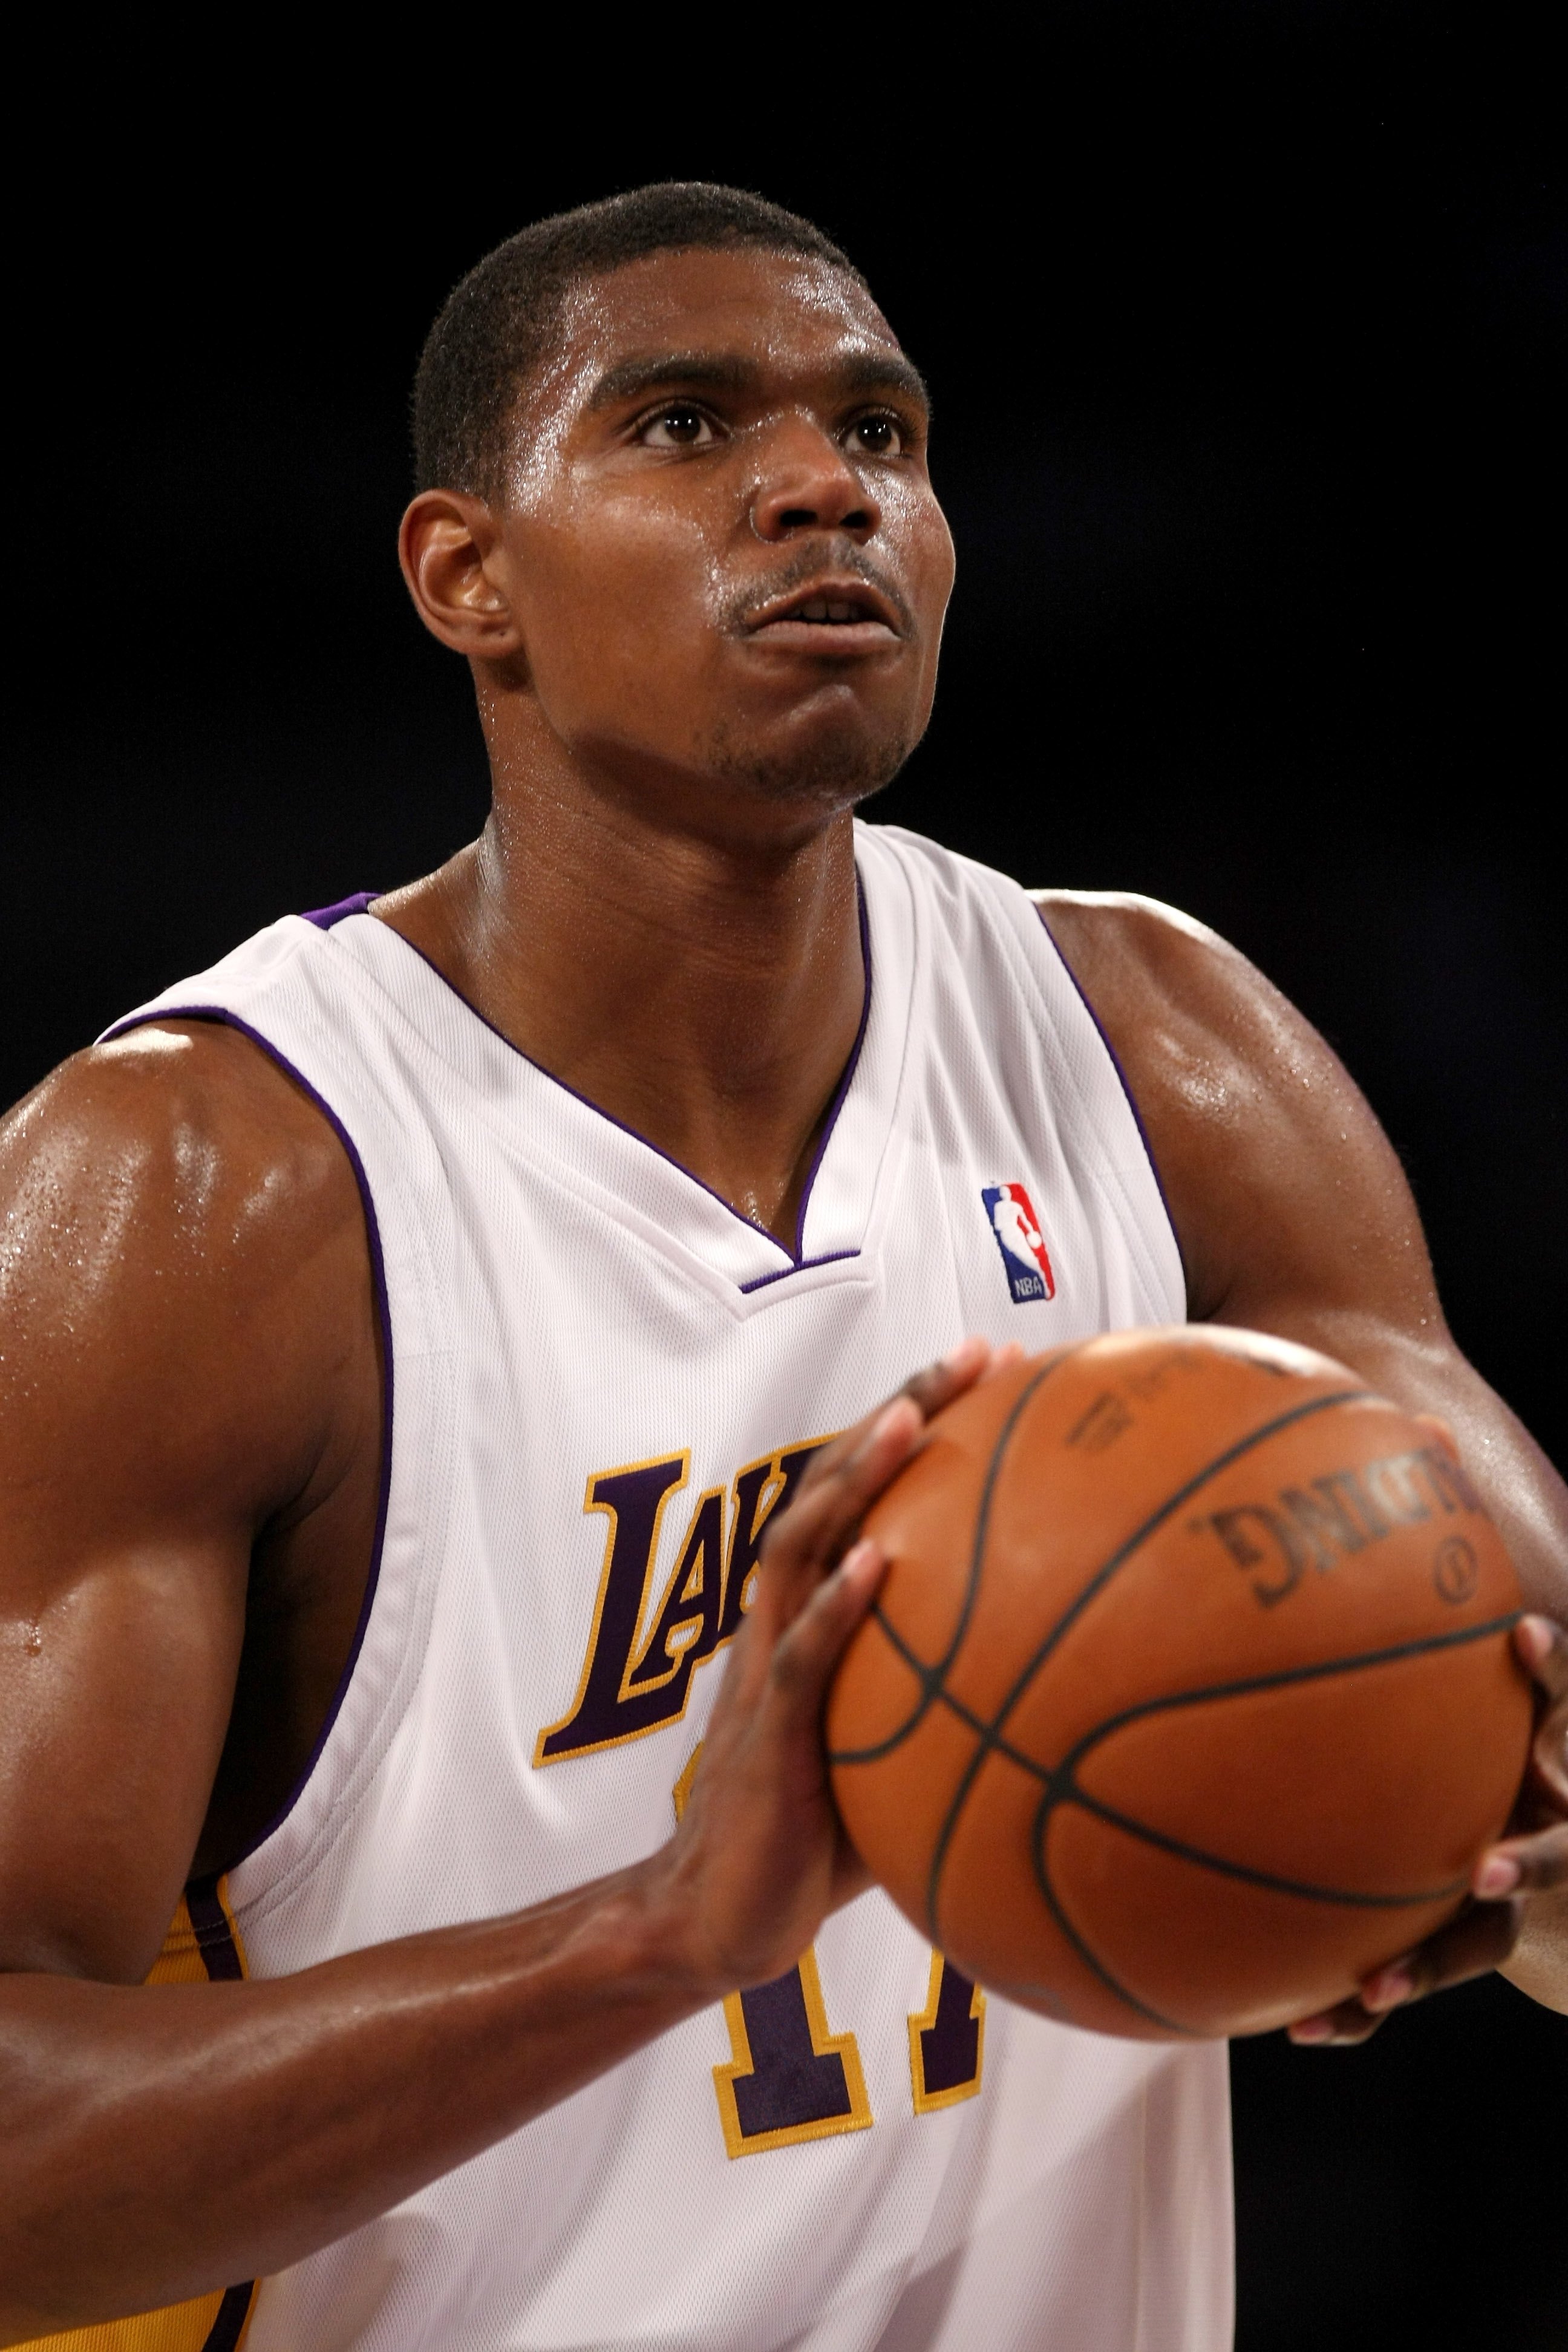 LOS ANGELES - NOVEMBER 15: Andrew Bynum #17 of  the Los Angeles Lakers takes a foul shot in the game with the Houston Rockets on November 15, 2009 at Staples Center in Los Angeles, California.  The Rockets won 101-91.  NOTE TO USER: User expressly acknowl